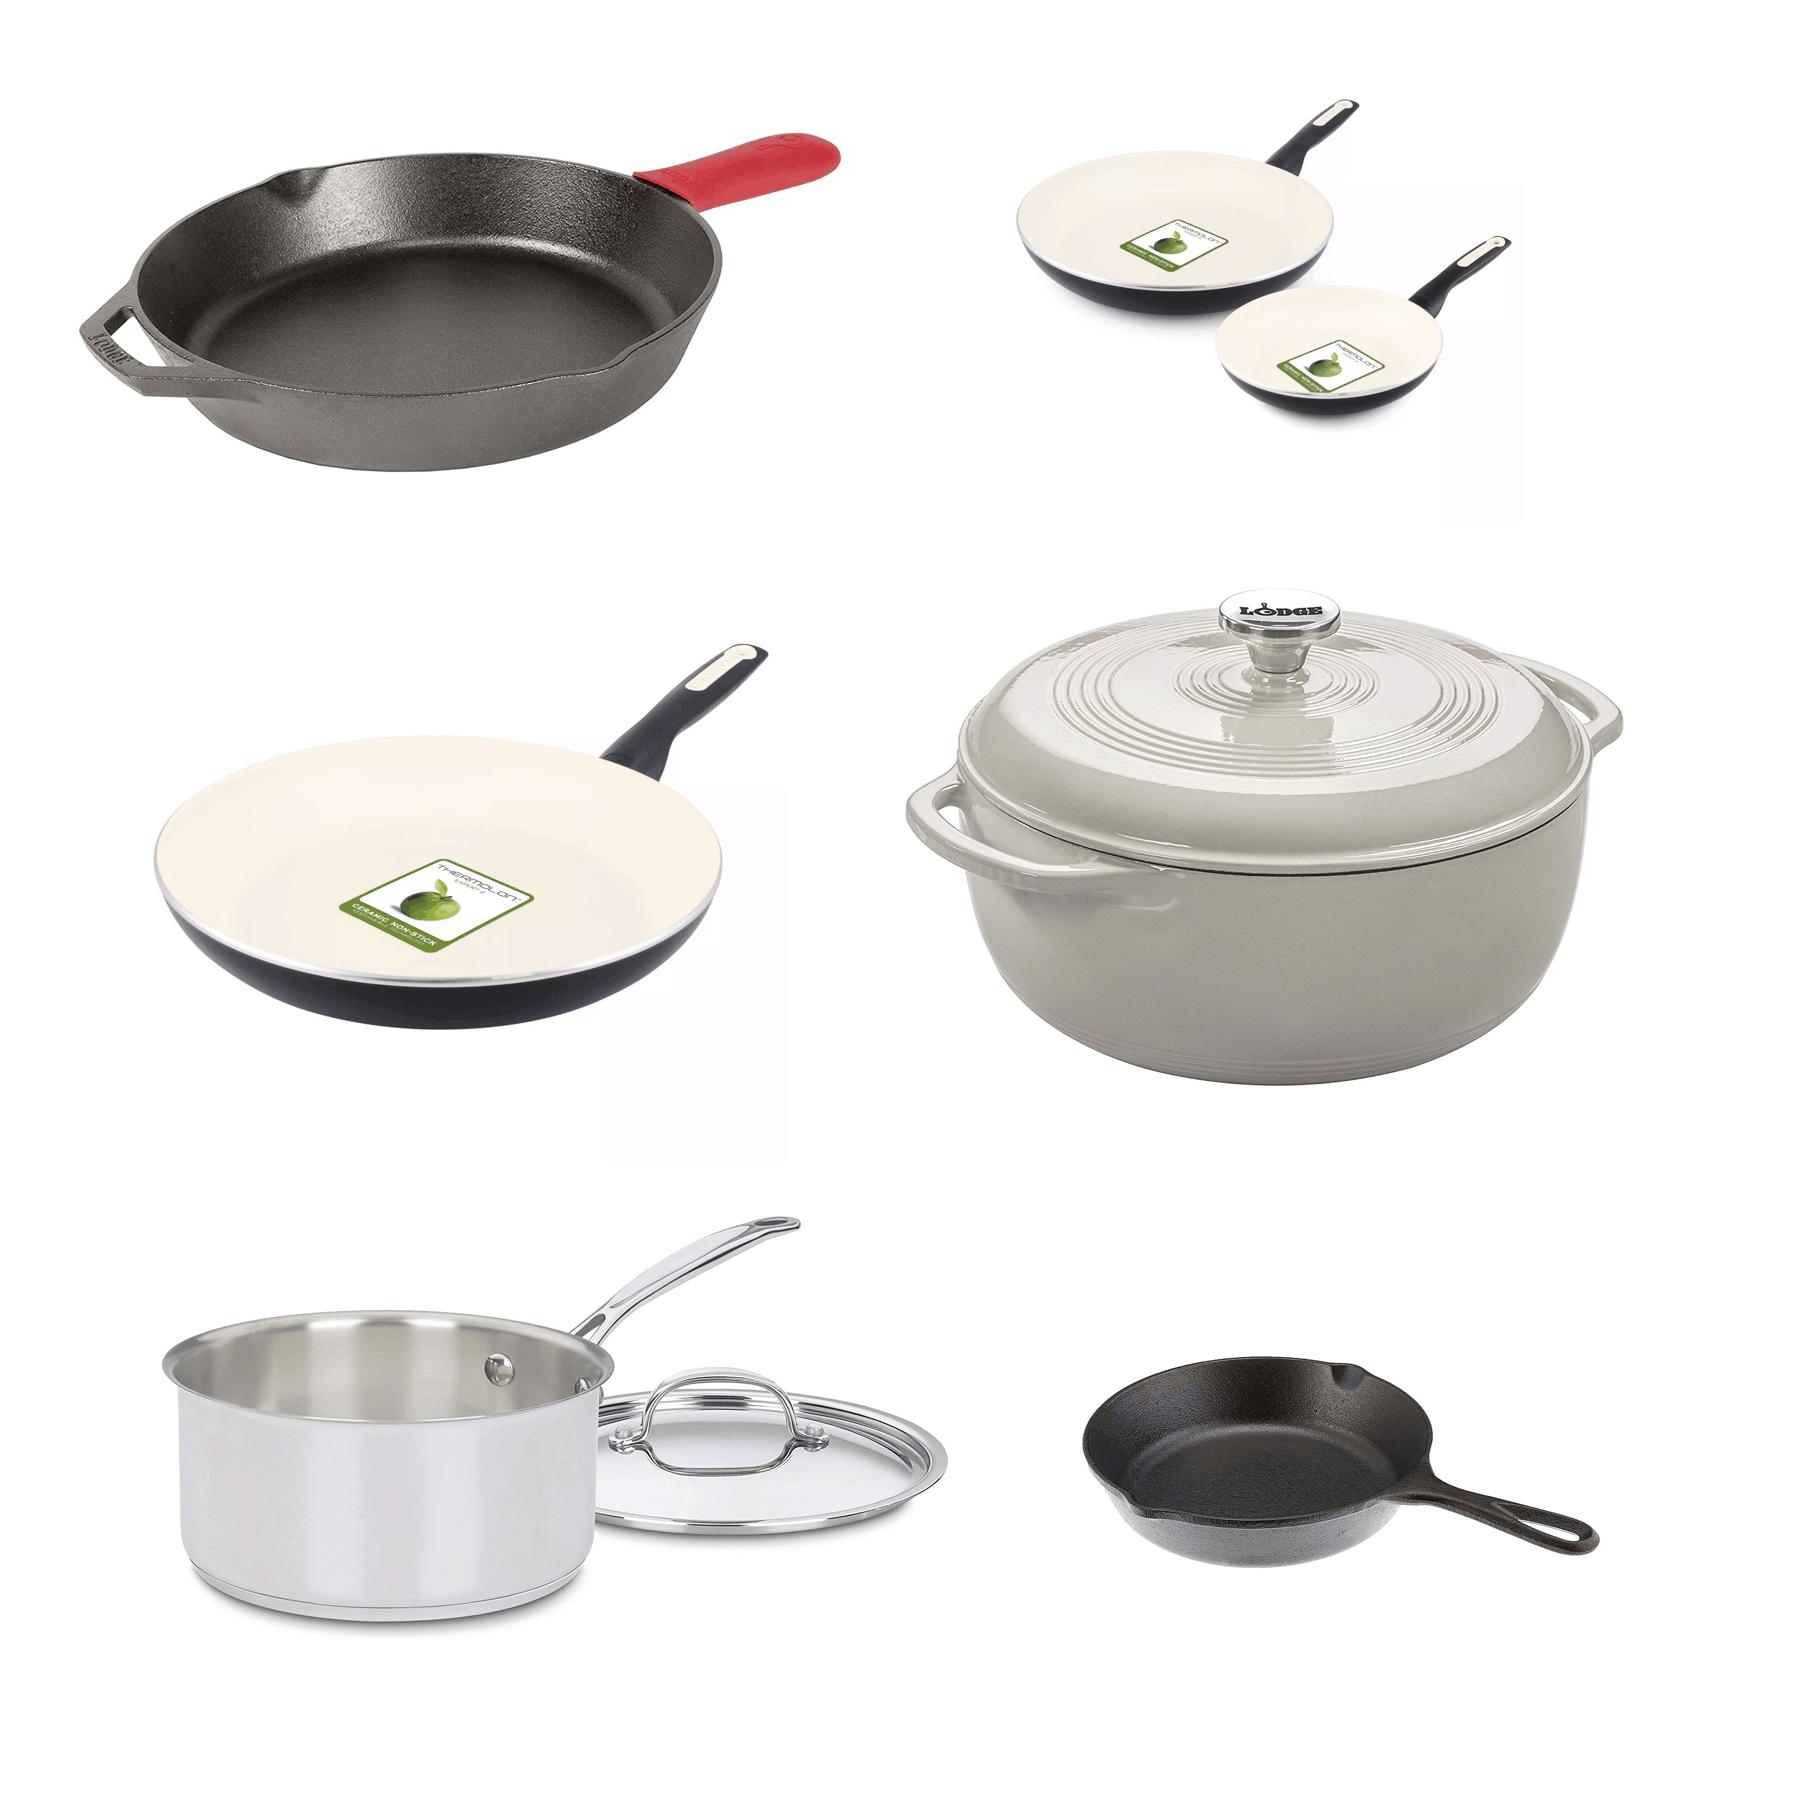 https://www.tasteslovely.com/wp-content/uploads/2018/06/Favorite-Non-Toxic-Cookware-1.png